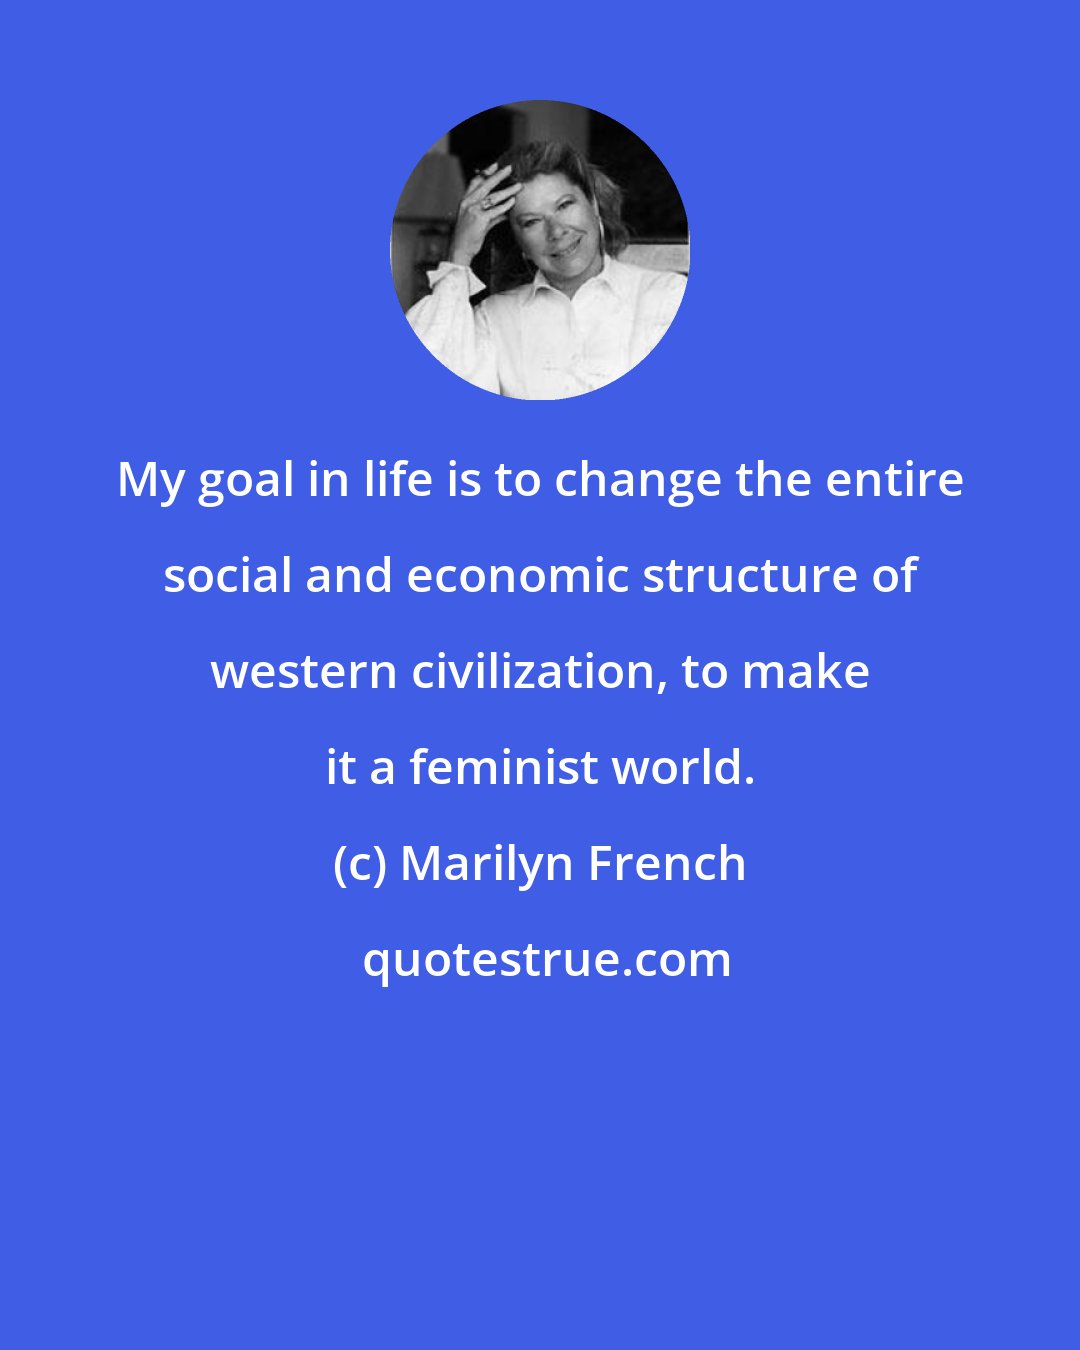 Marilyn French: My goal in life is to change the entire social and economic structure of western civilization, to make it a feminist world.